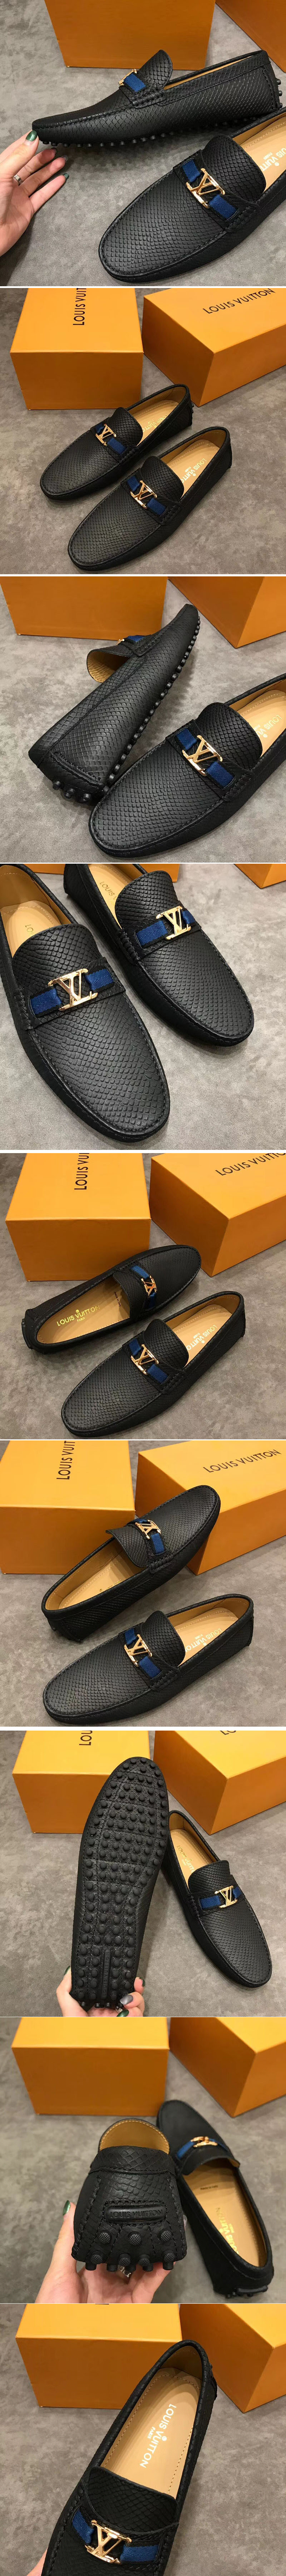 Replica Louis Vuitton LV Hockenheim Loafer And Shoes Black Calf Leather Gold Buckle